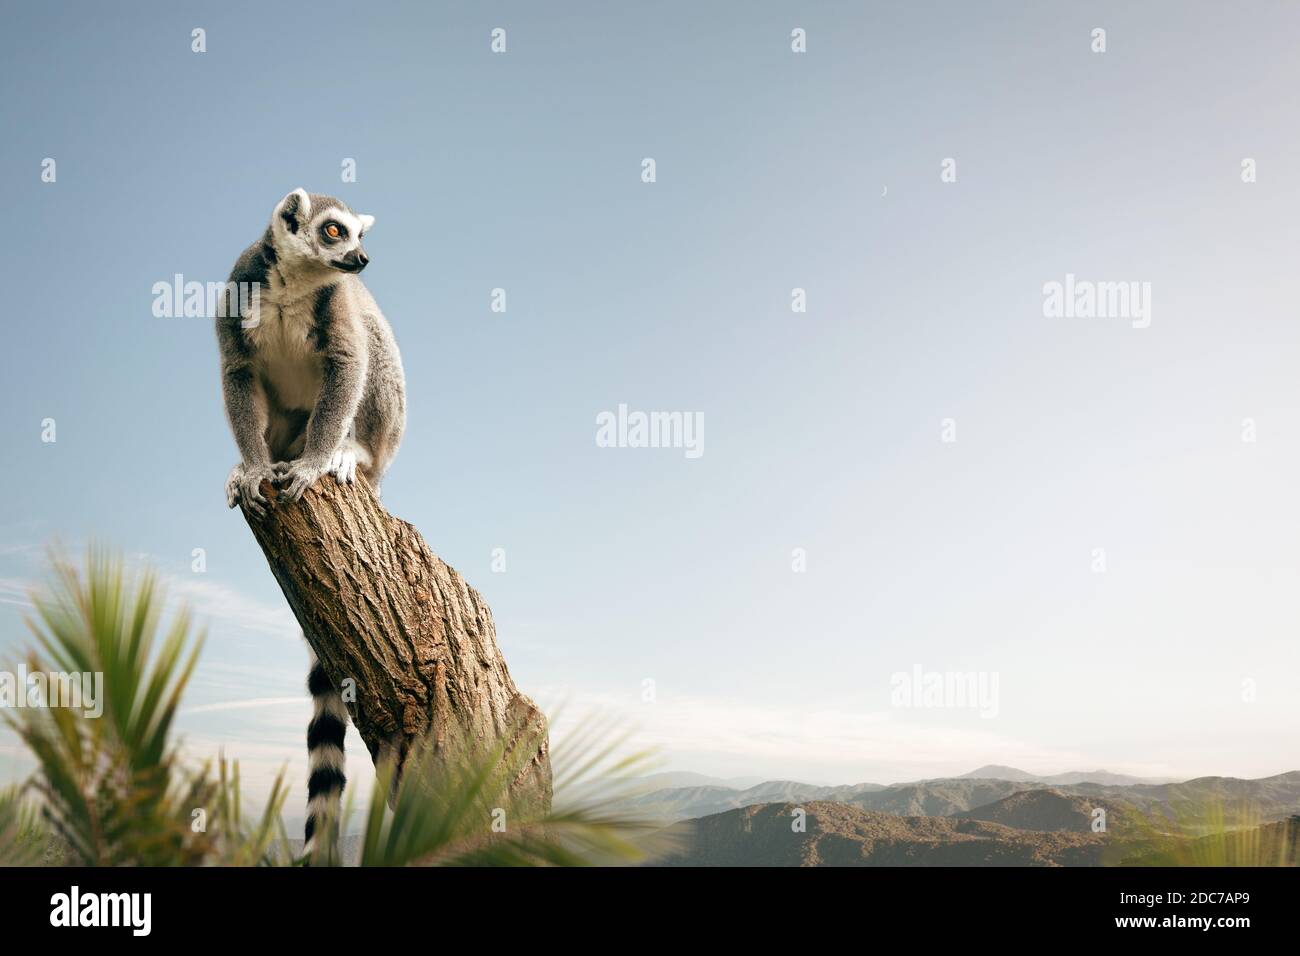 Ring-tailed lemur sitting on a tree Stock Photo